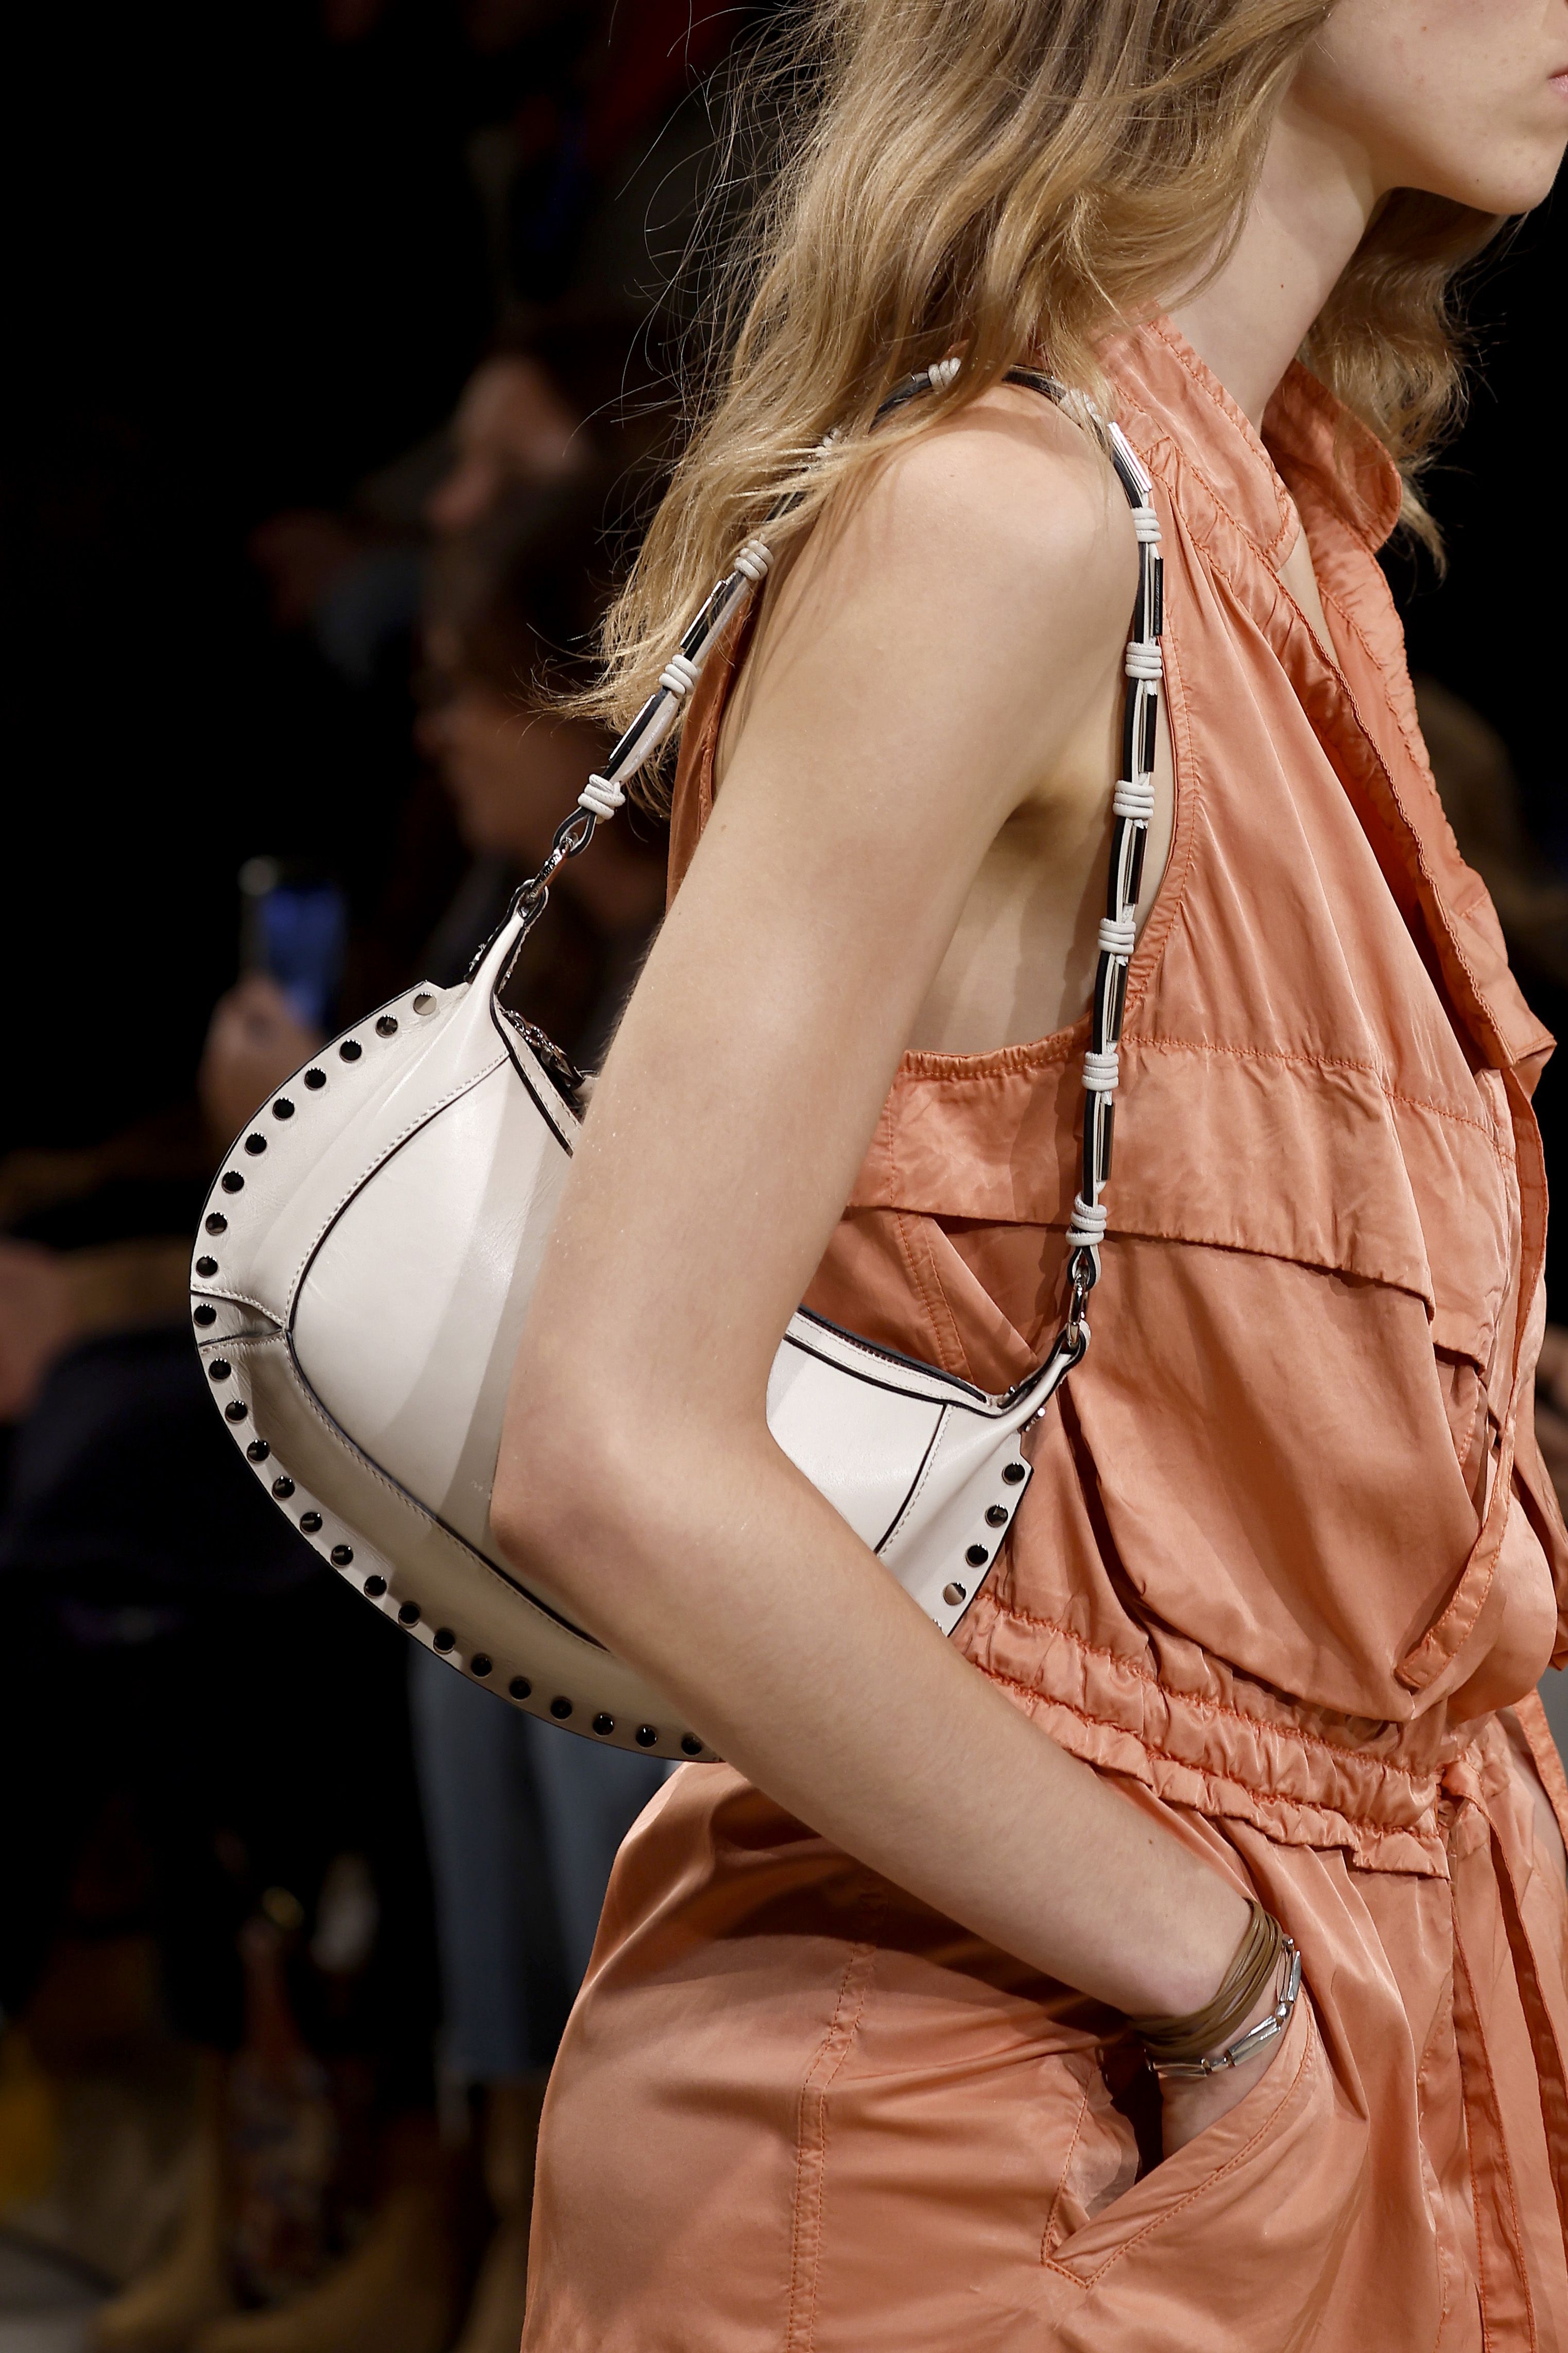 Best summer bags 2023: Summer bag trends to know now